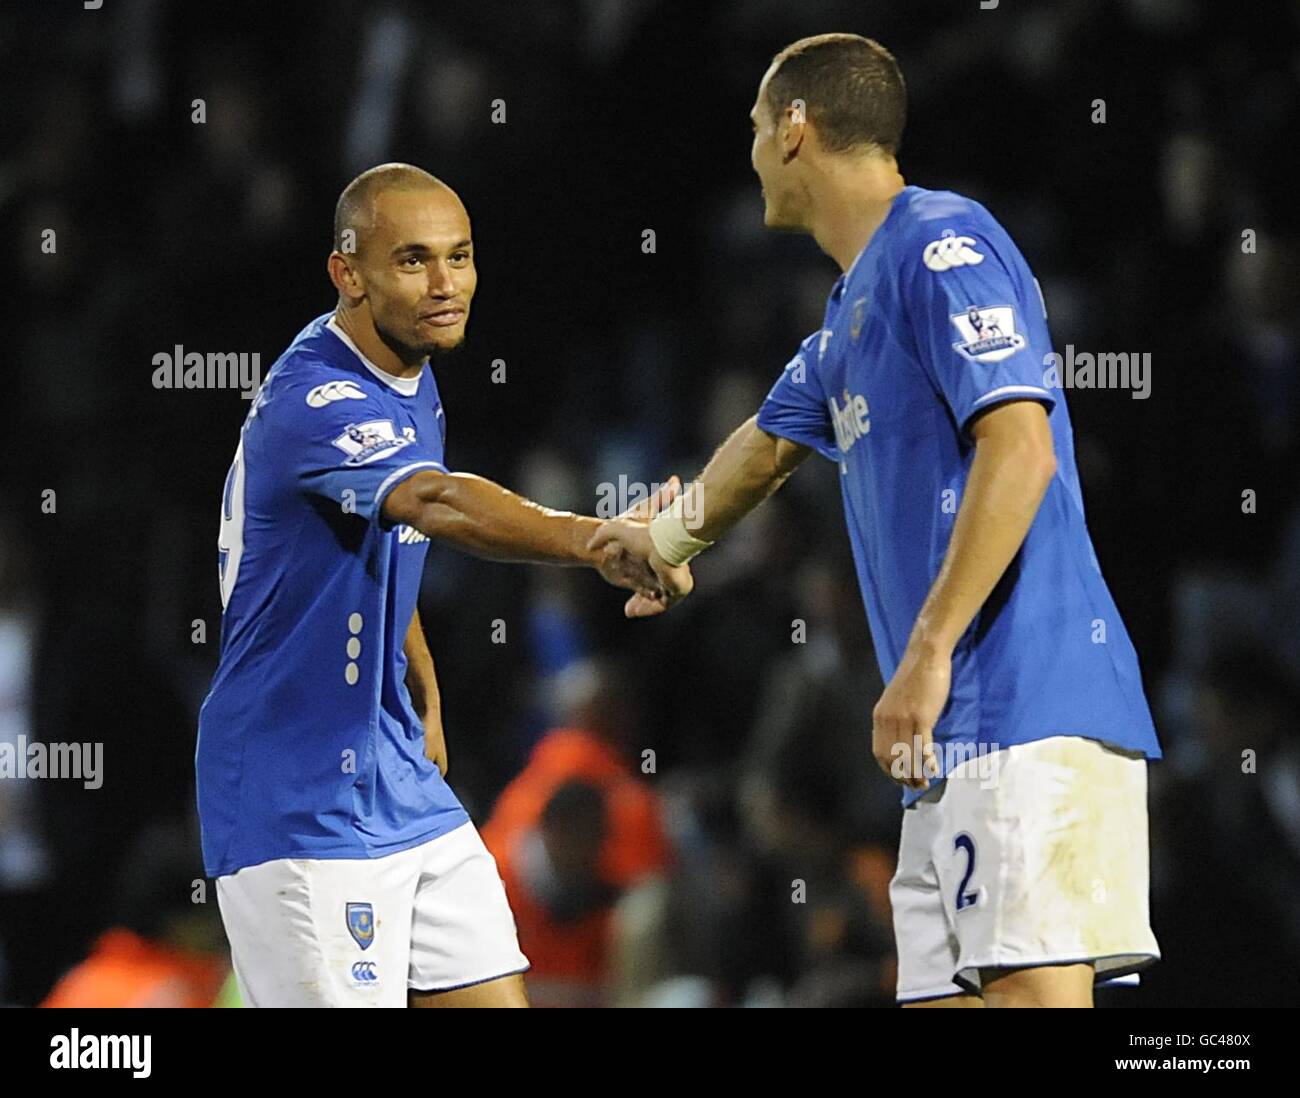 Portsmouth's Danny Webber (left) ceclebrates scoring their second goal with team mate Hassan Yebda (right). Stock Photo